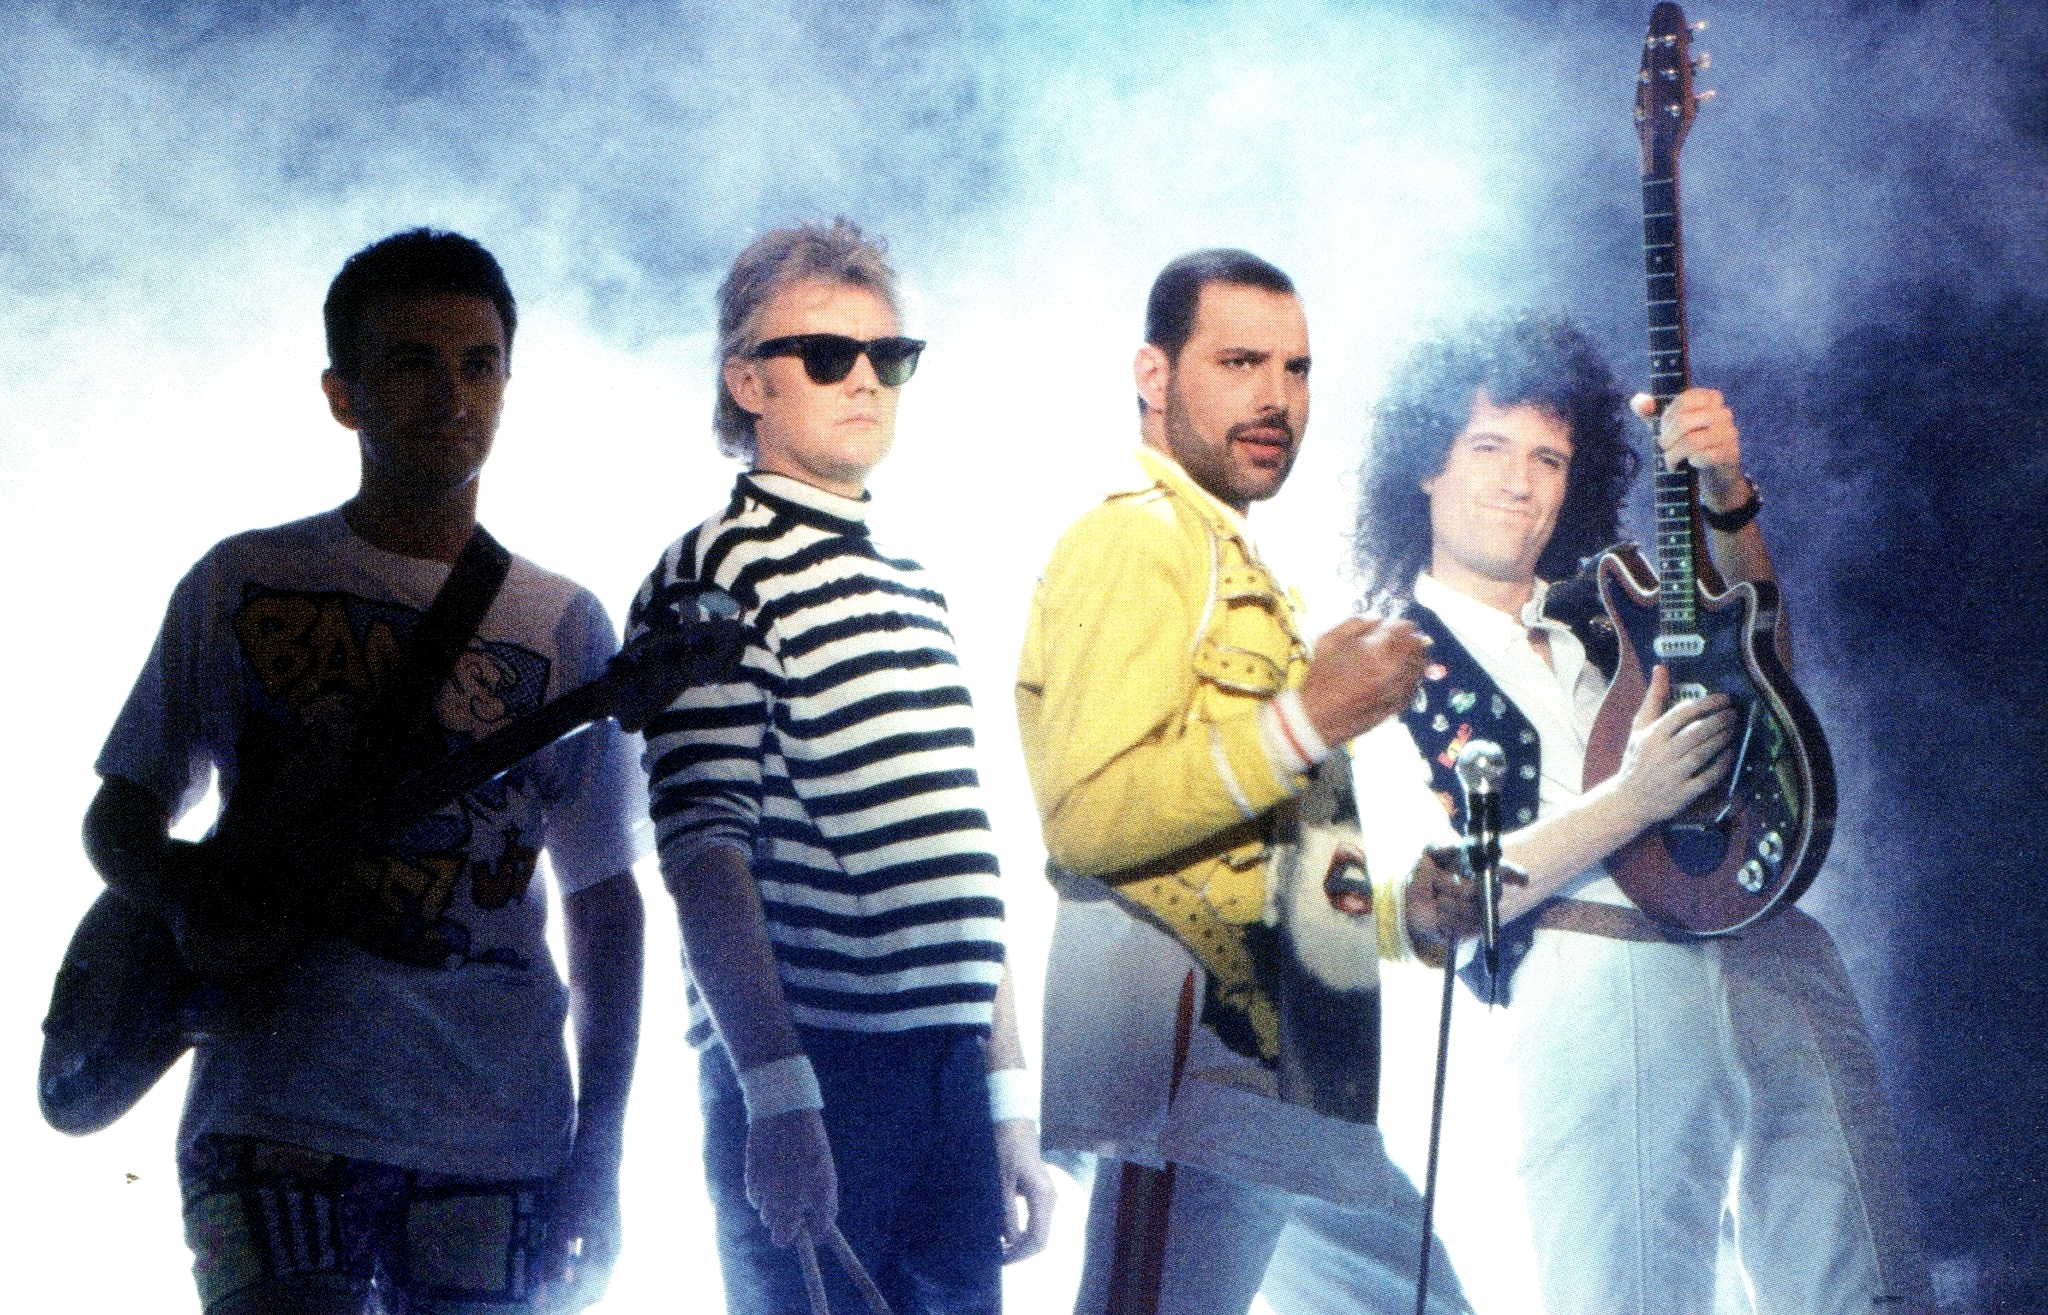 queen the miracle tour 1989